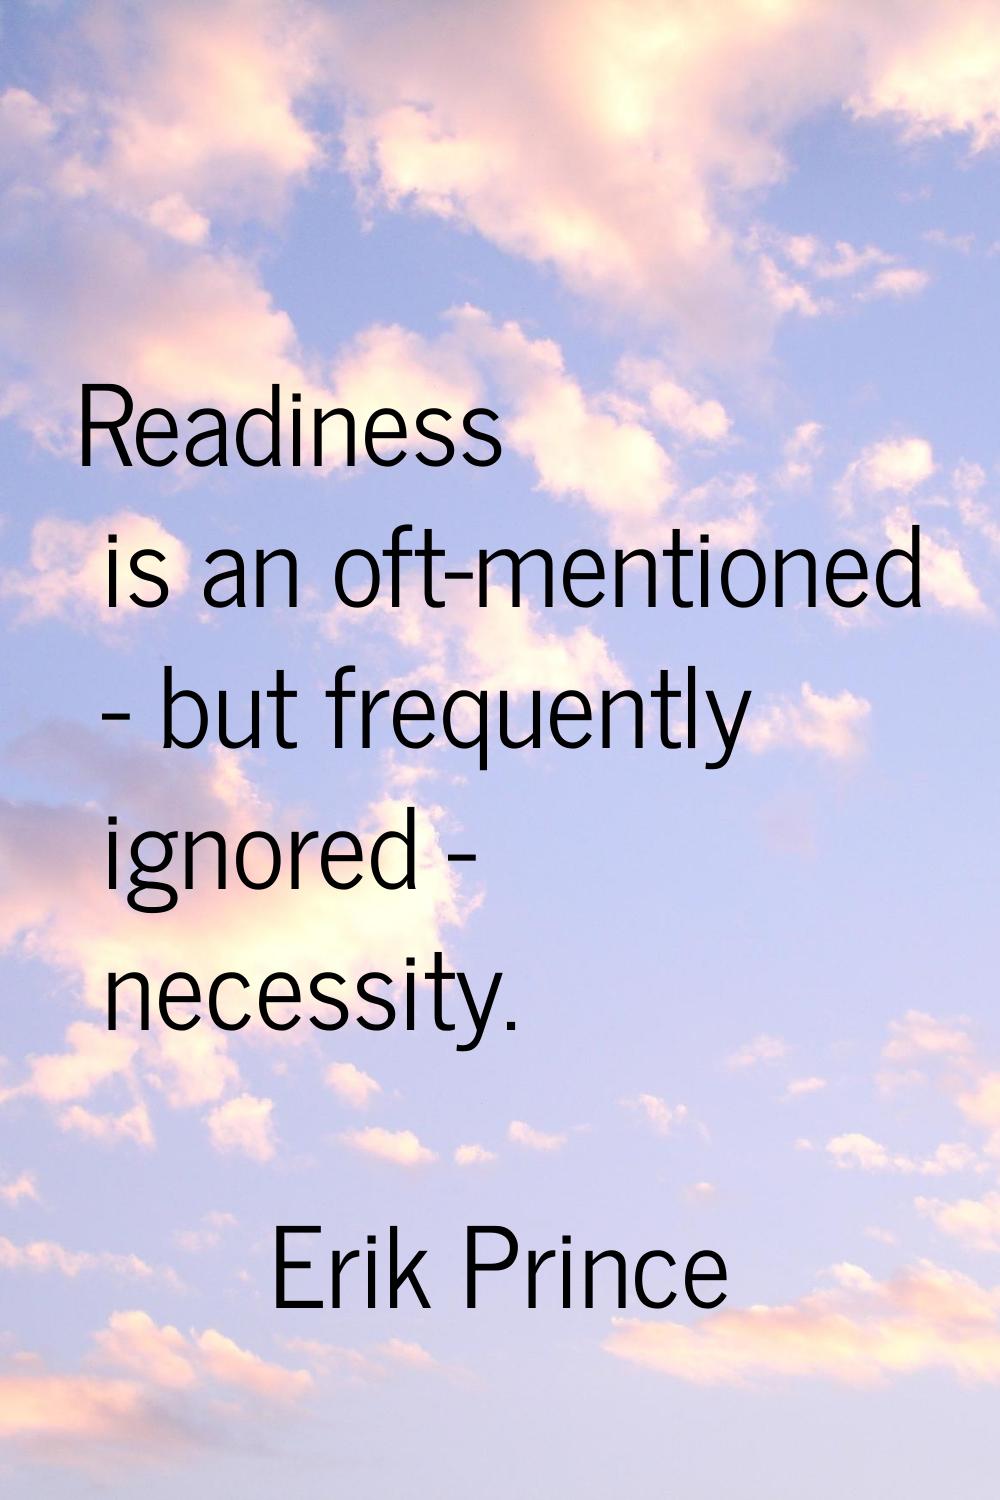 Readiness is an oft-mentioned - but frequently ignored - necessity.